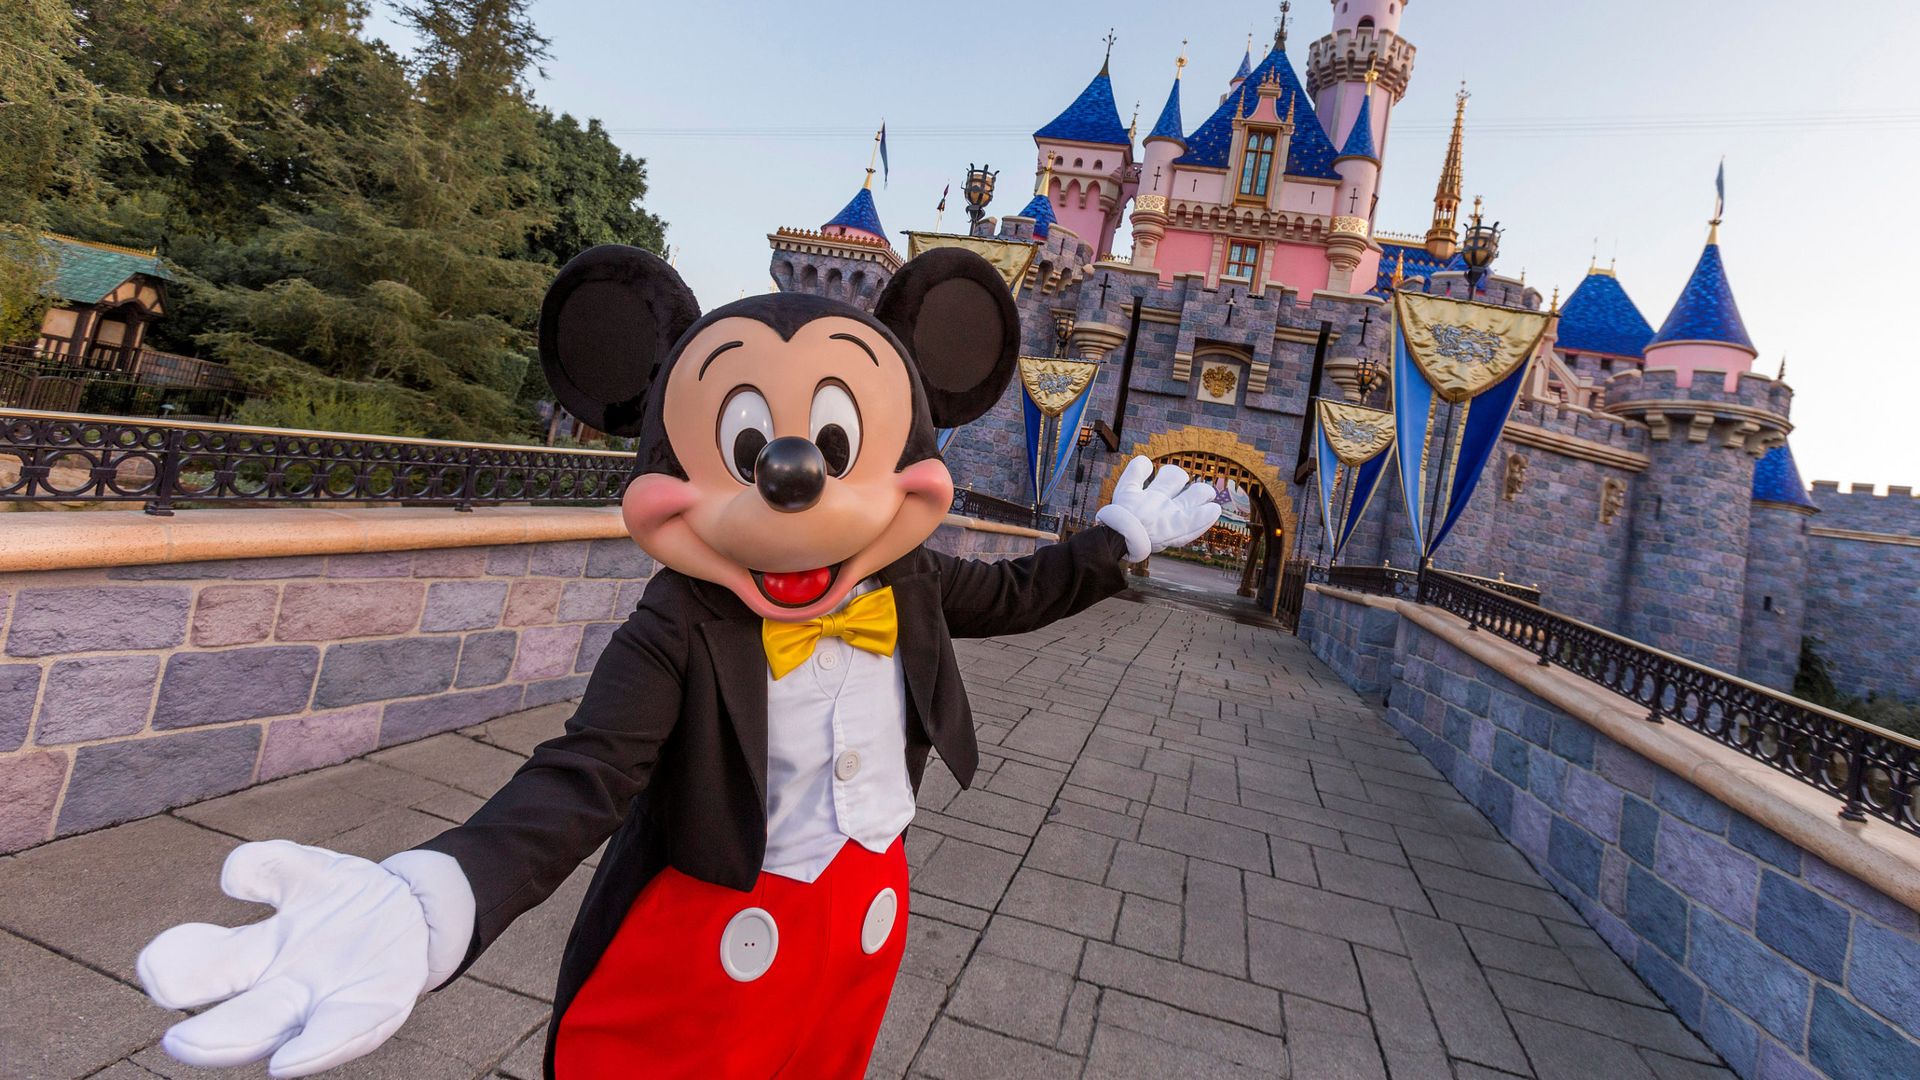 Disneyland Performers Vote to Unionize with Actors' Equity Association